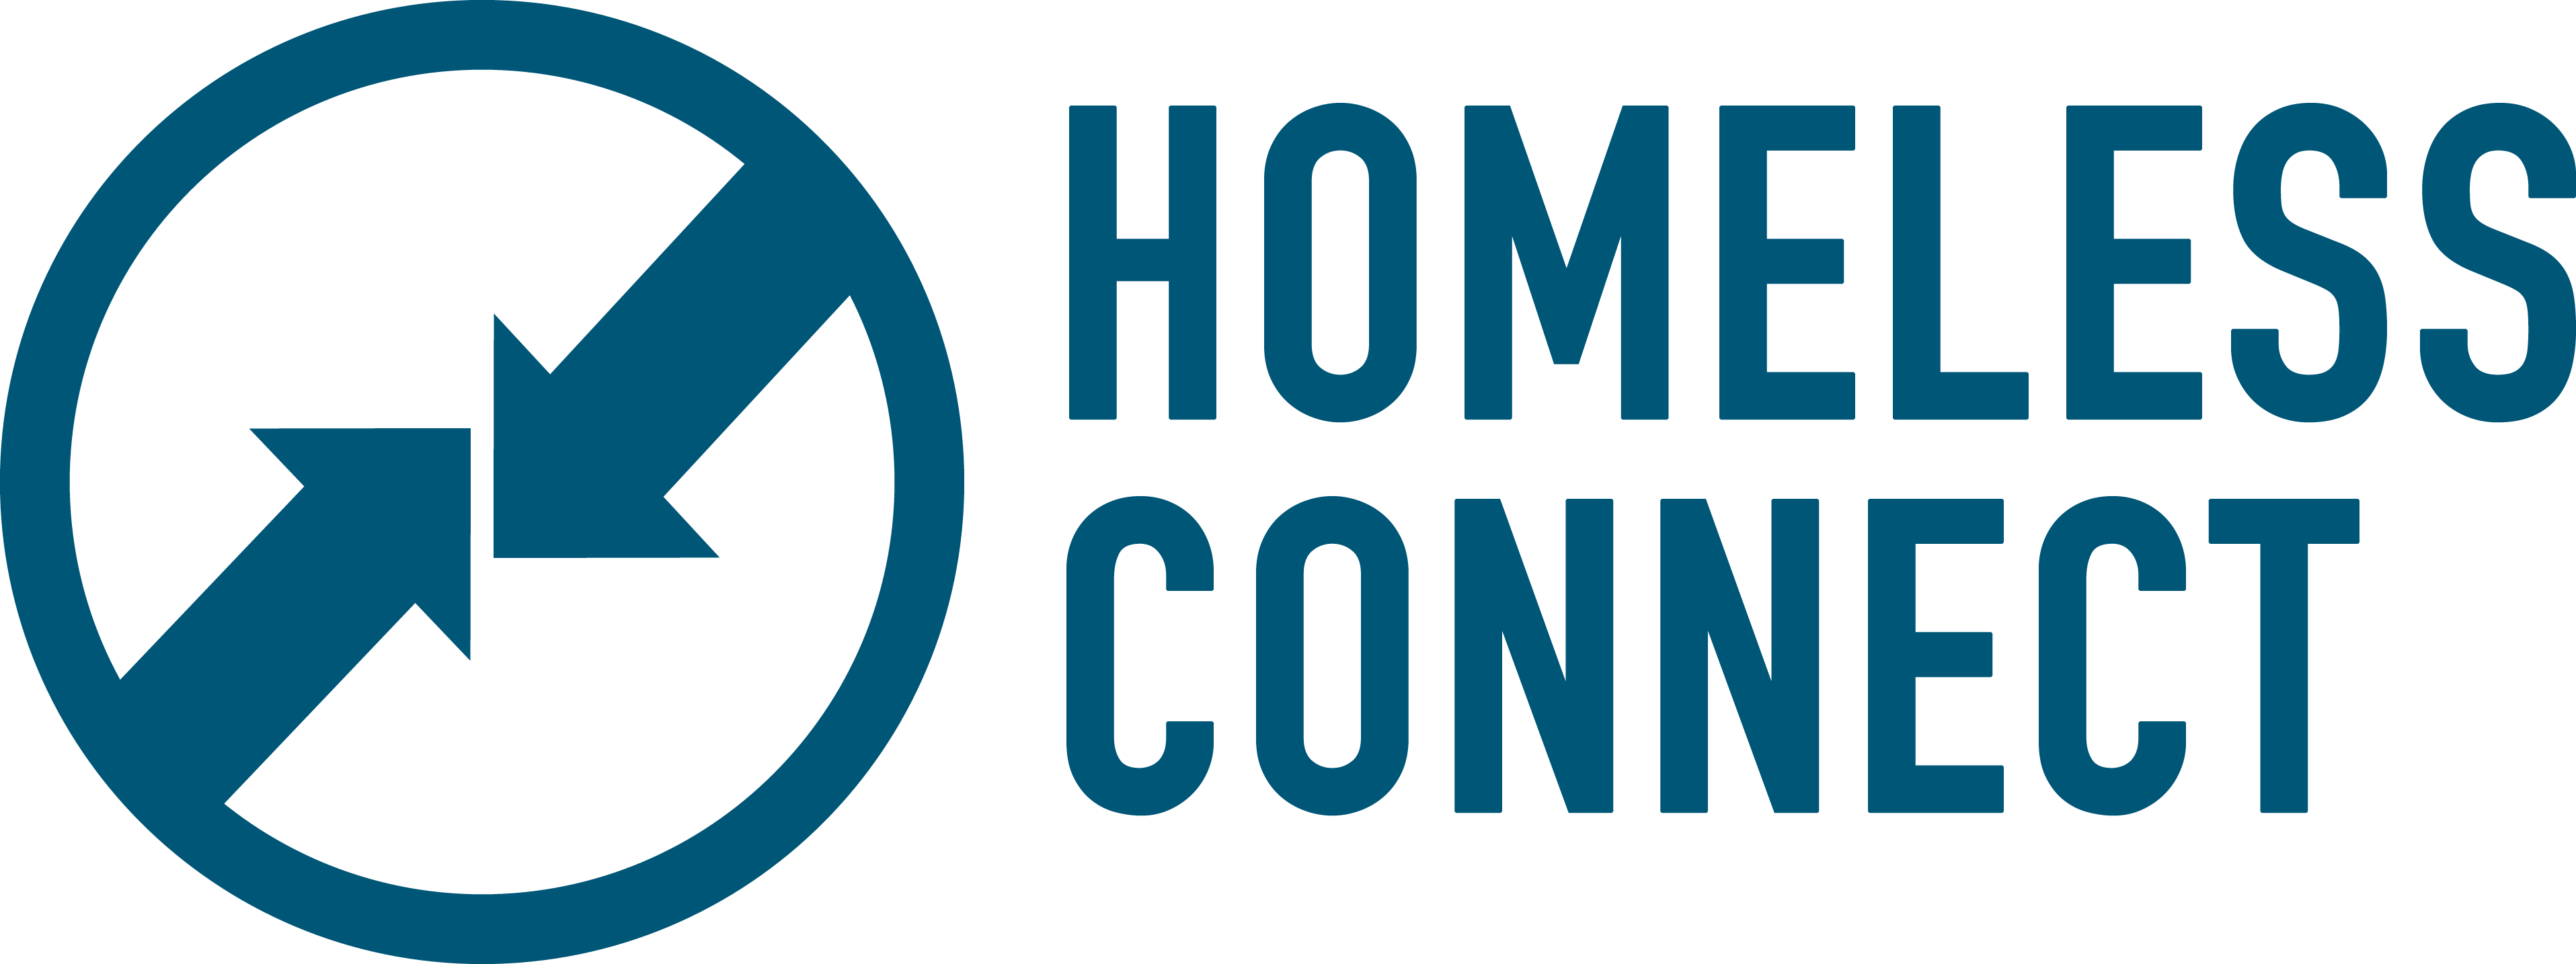 2018 East Central Homeless Connect